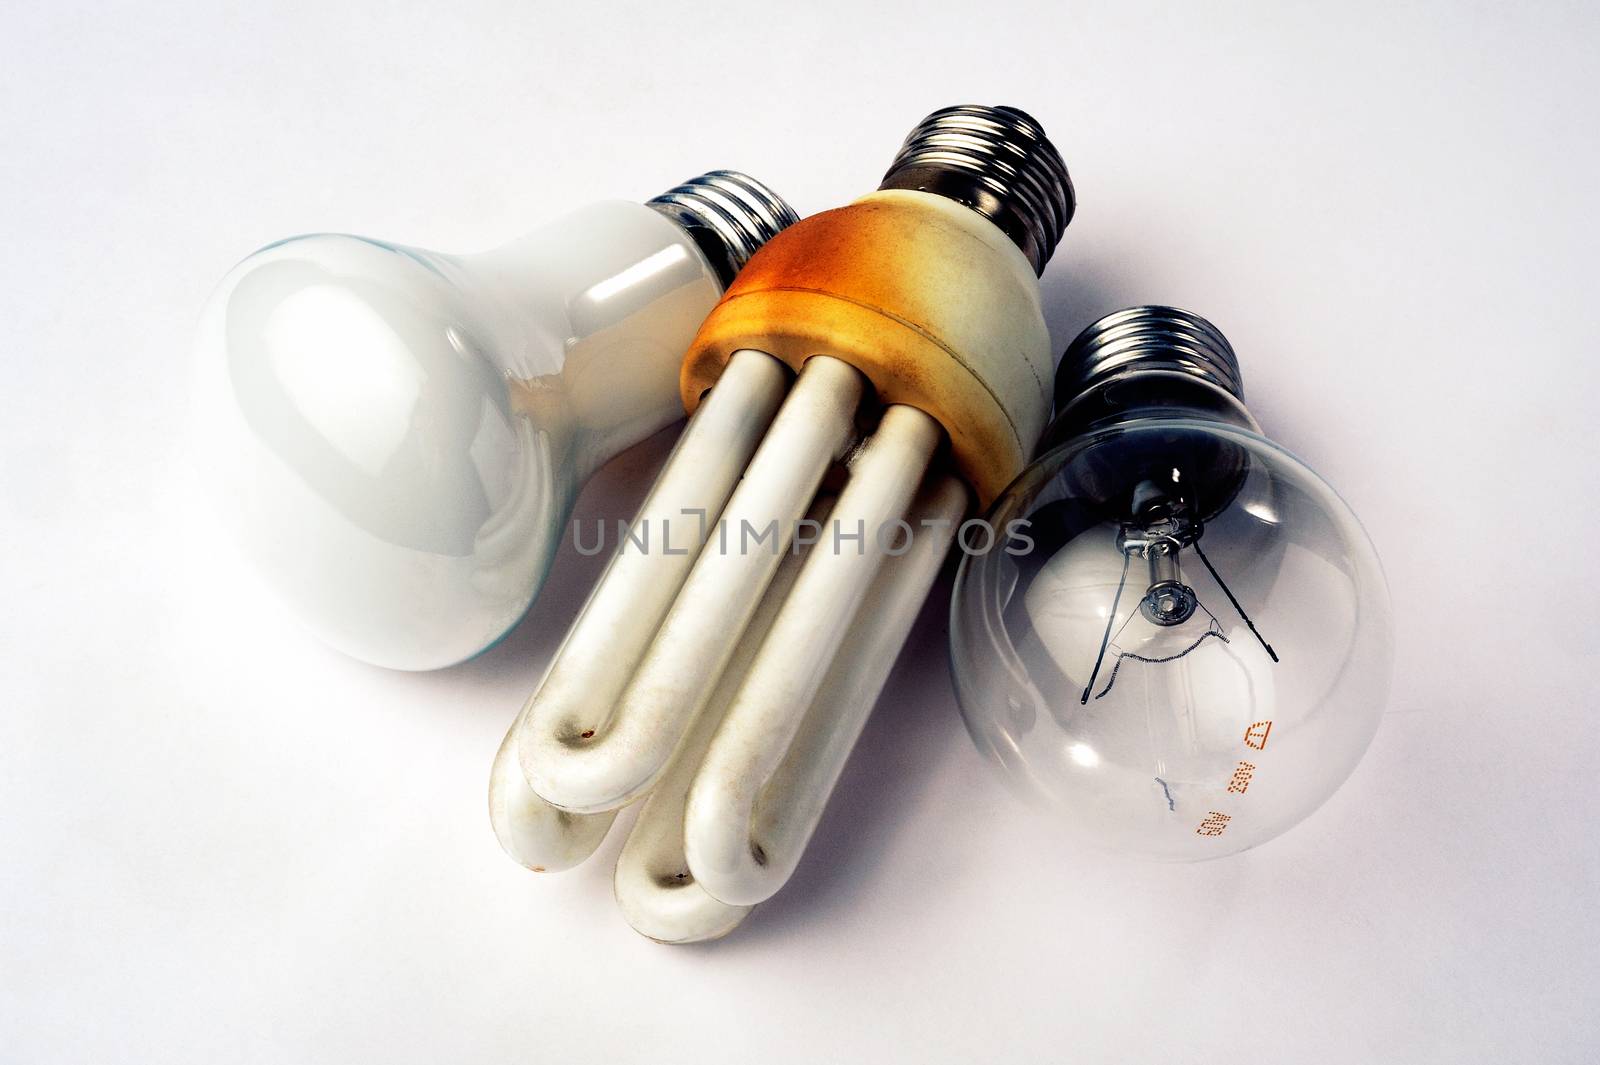 Recycling of used light bulb and economic legacy by gillespaire